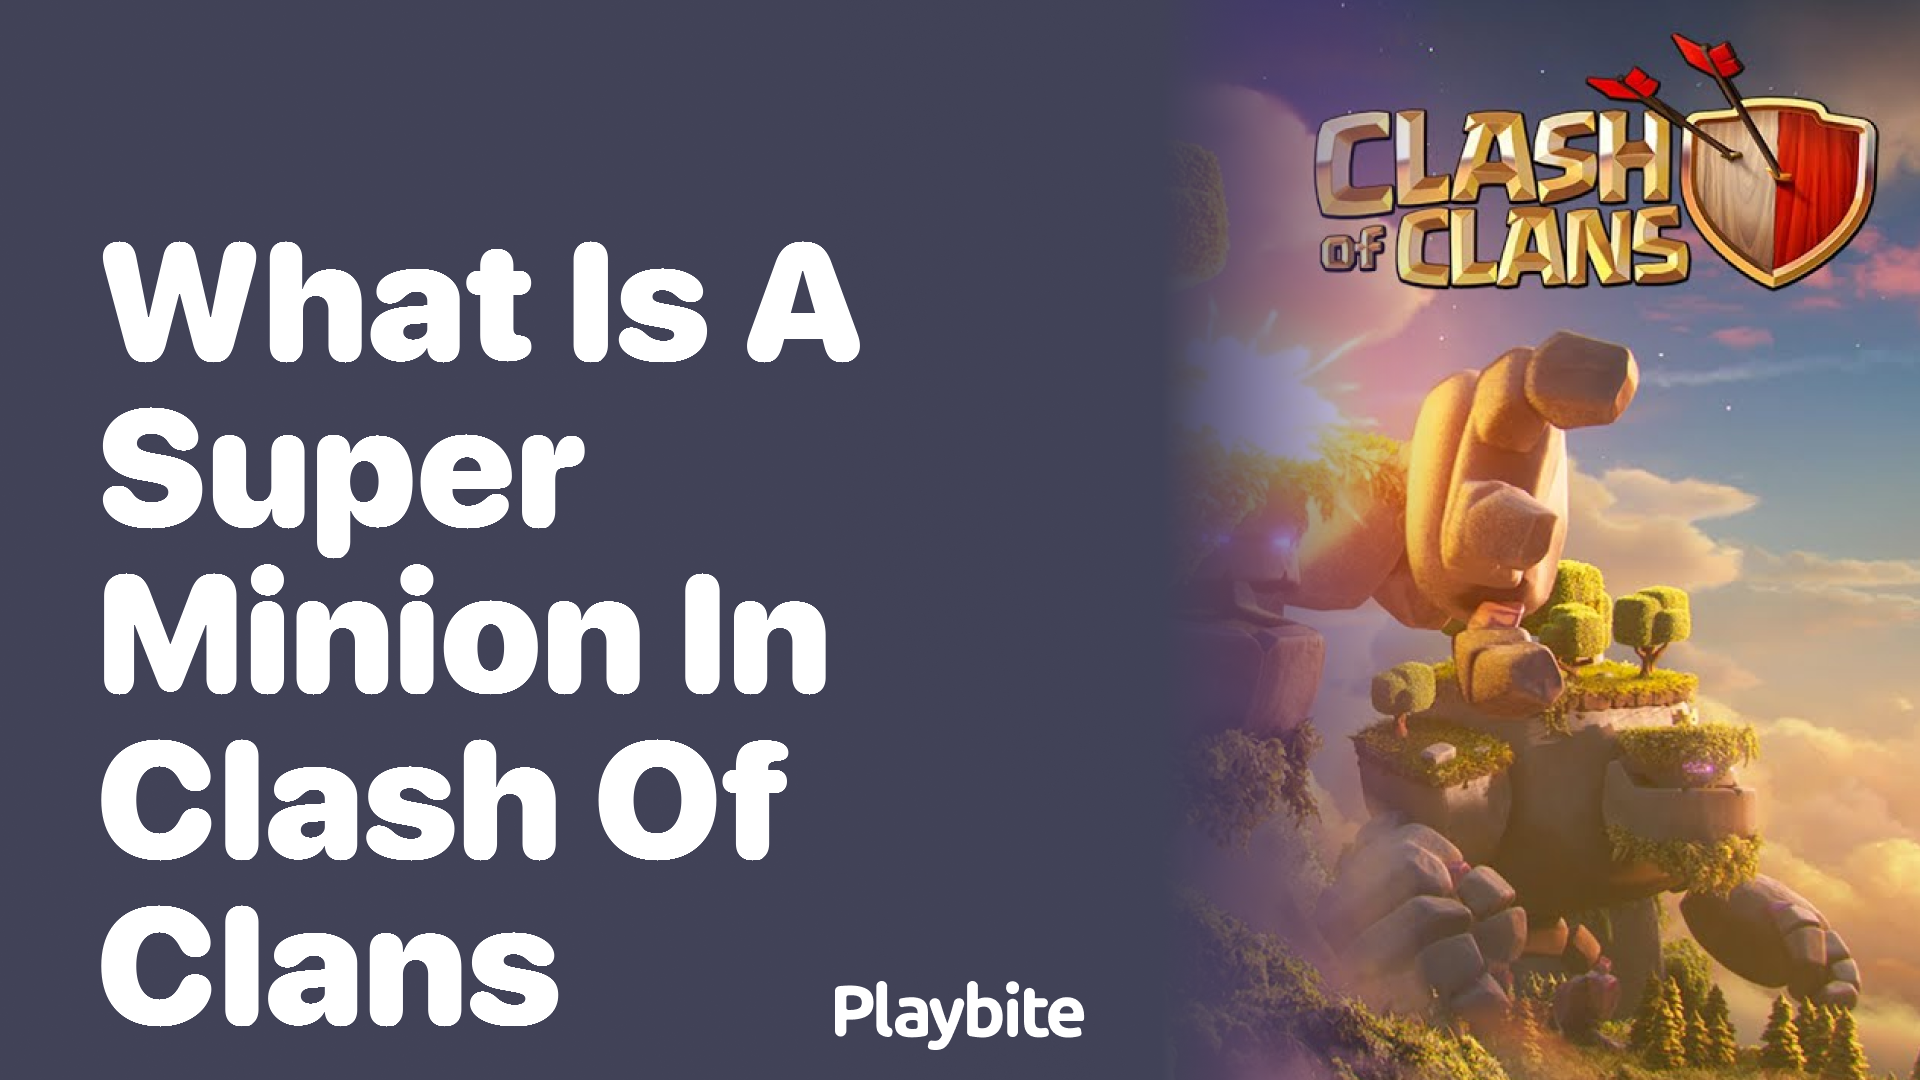 What is a Super Minion in Clash of Clans?